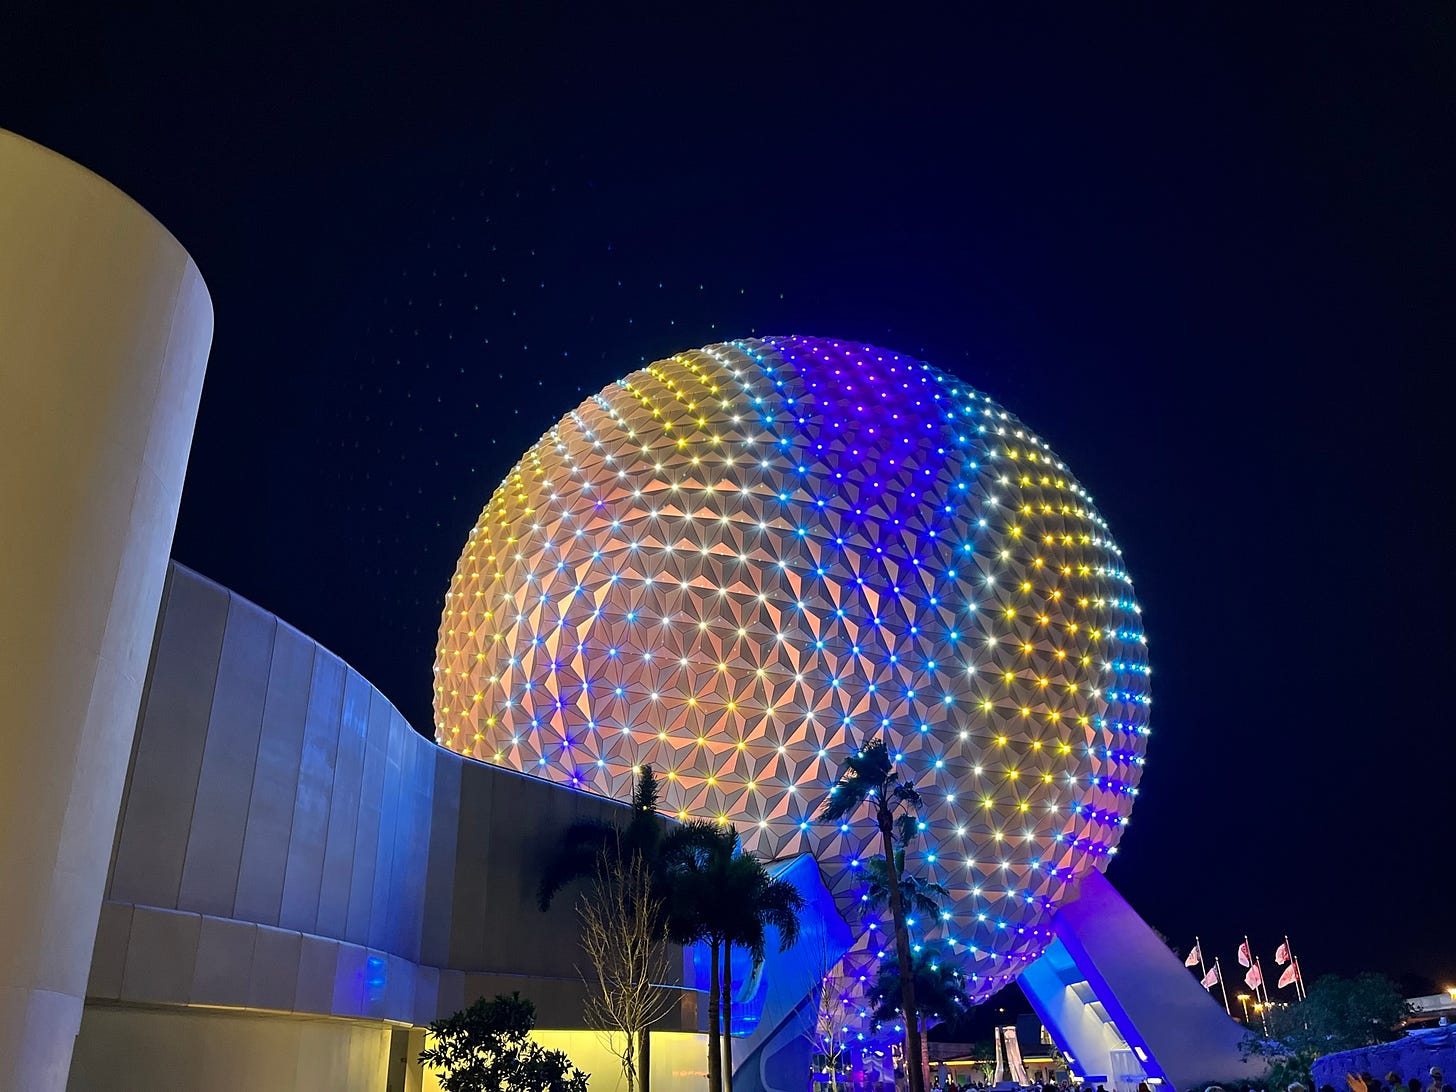 The iconic Epcot ball at night, lit up in many colors.